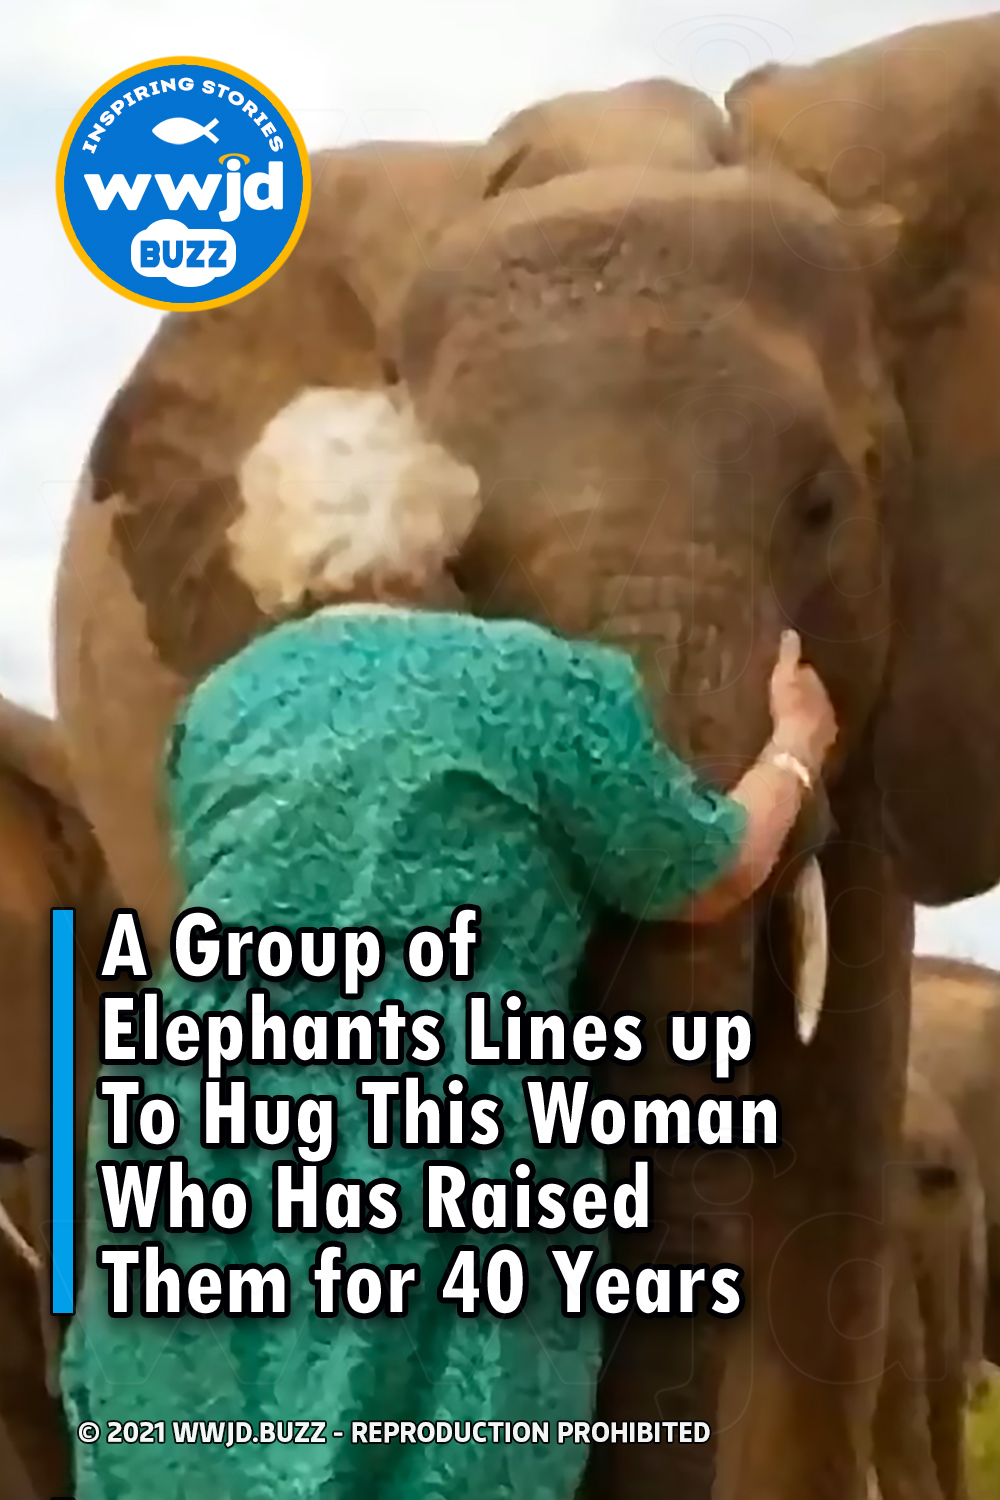 A Group of Elephants Lines up To Hug This Woman Who Has Raised Them for 40 Years